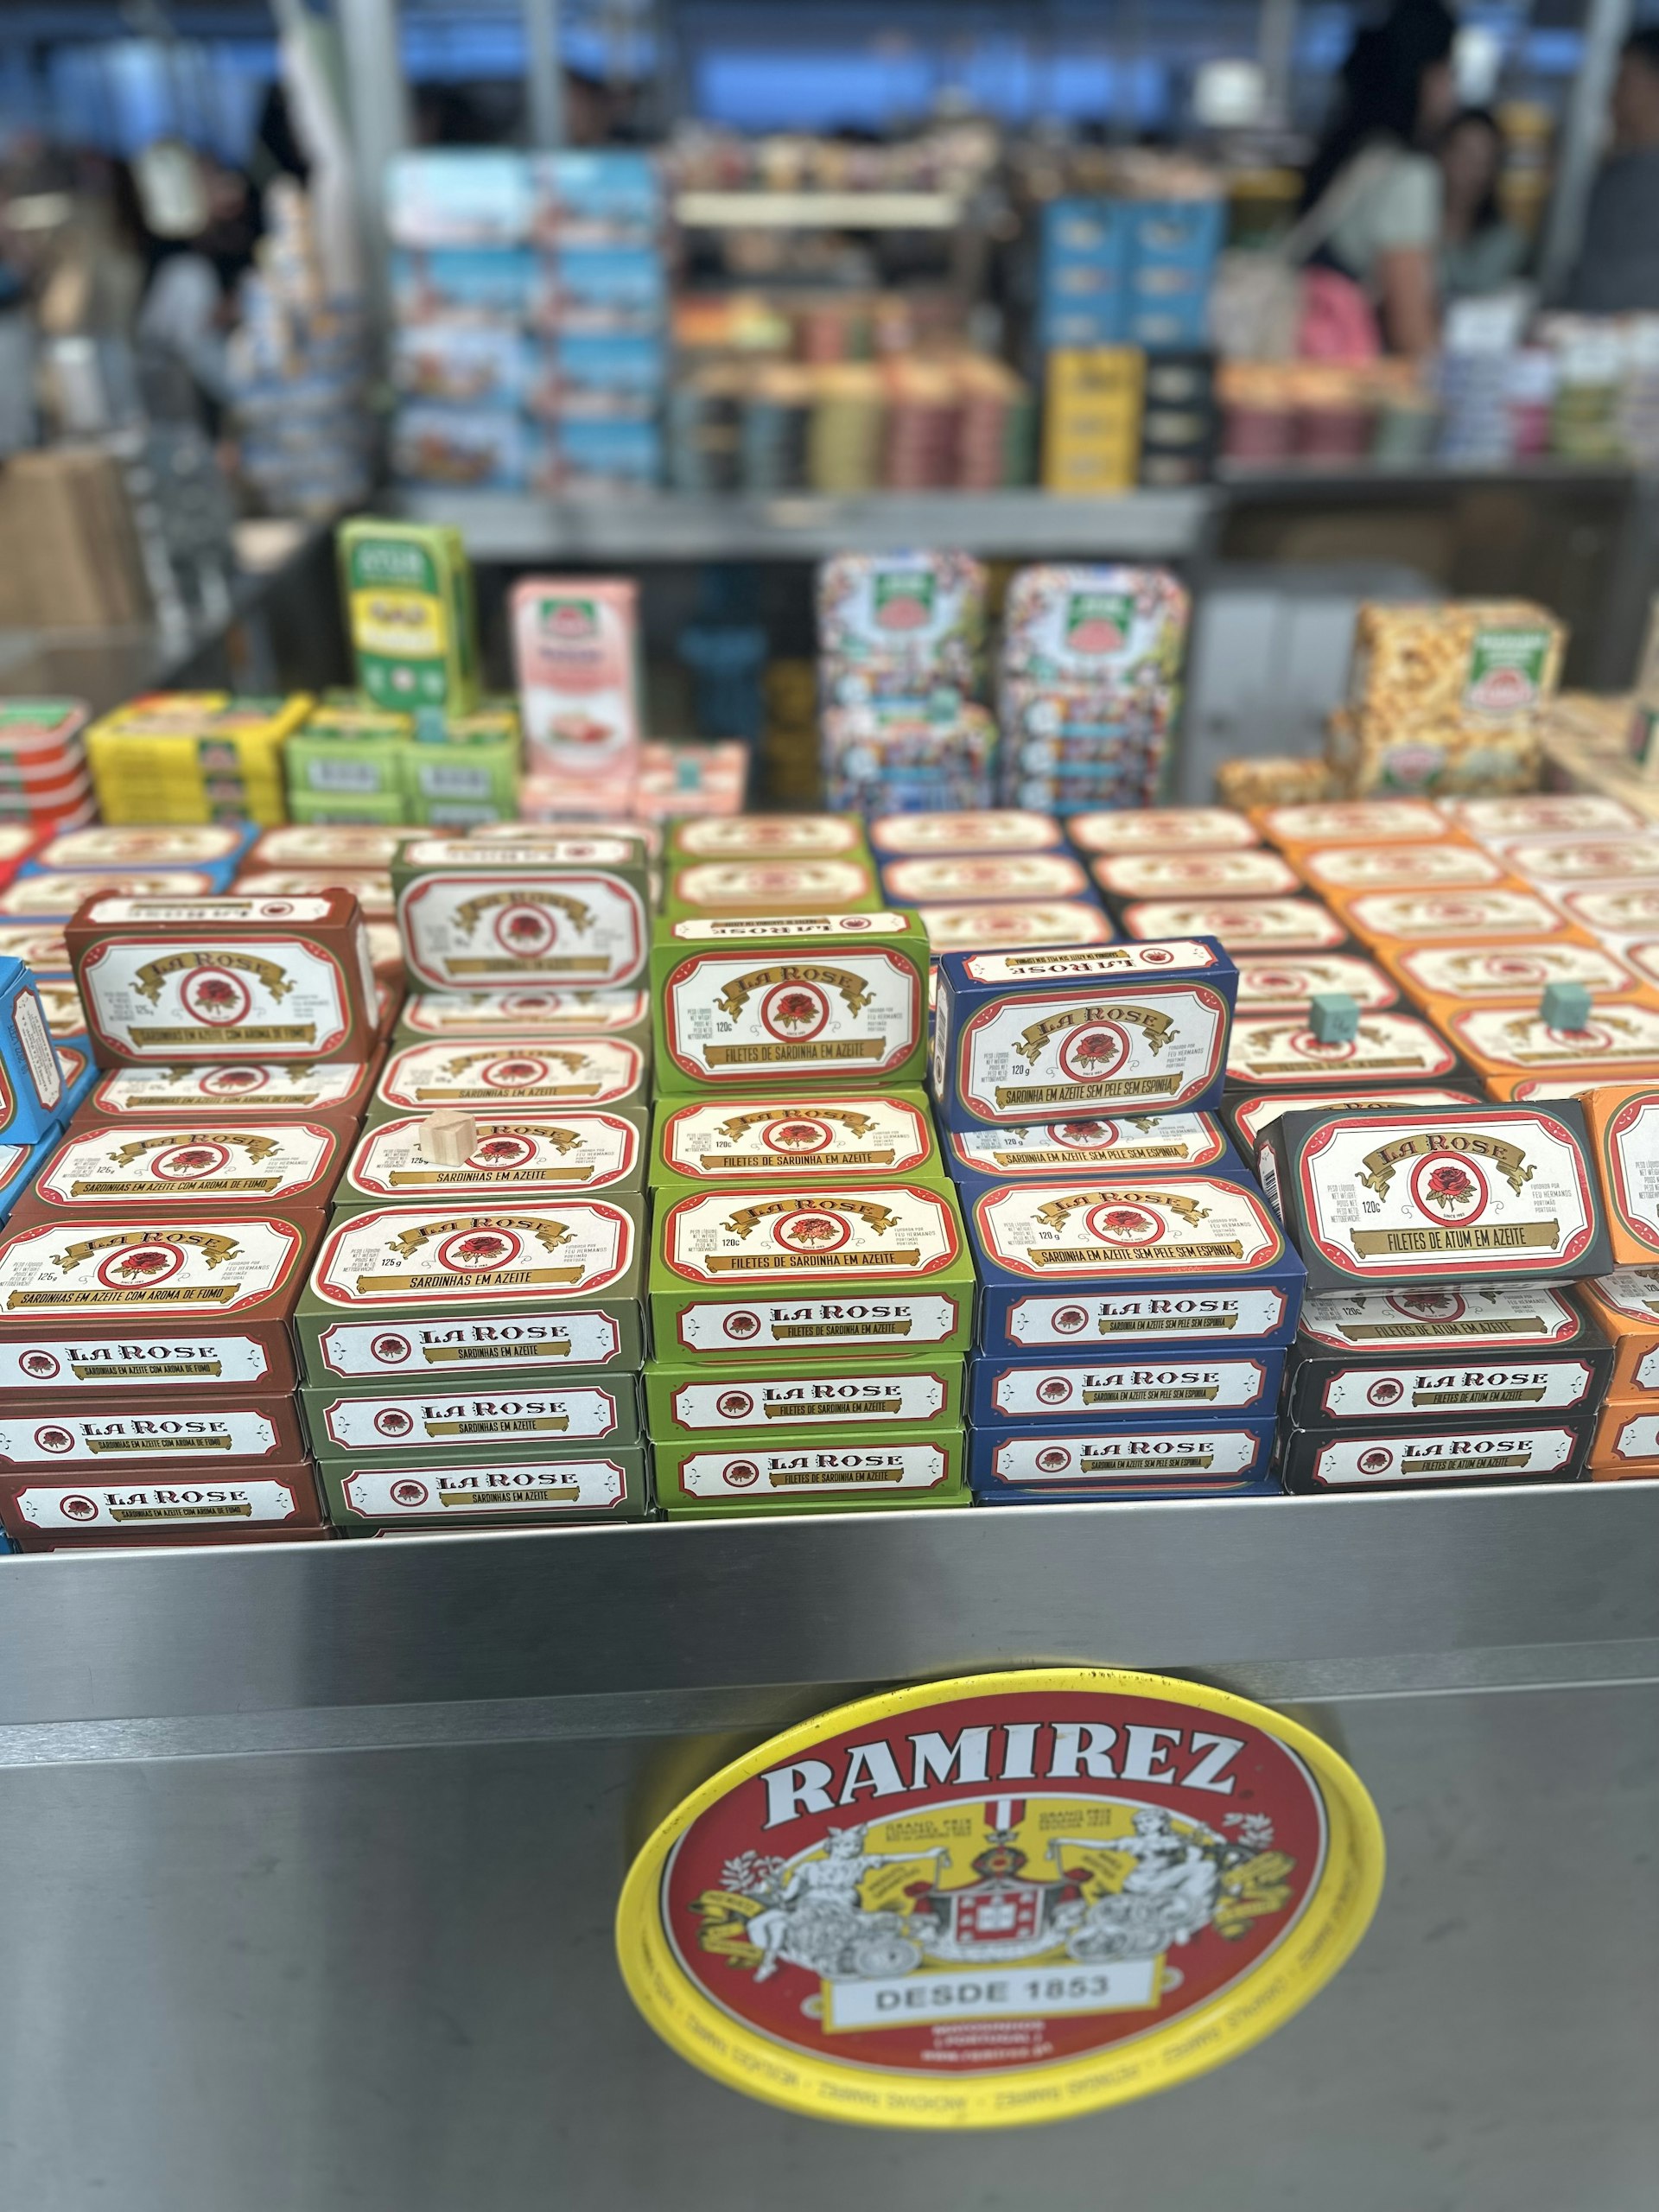 Stacks of tins of sardines on a market stall